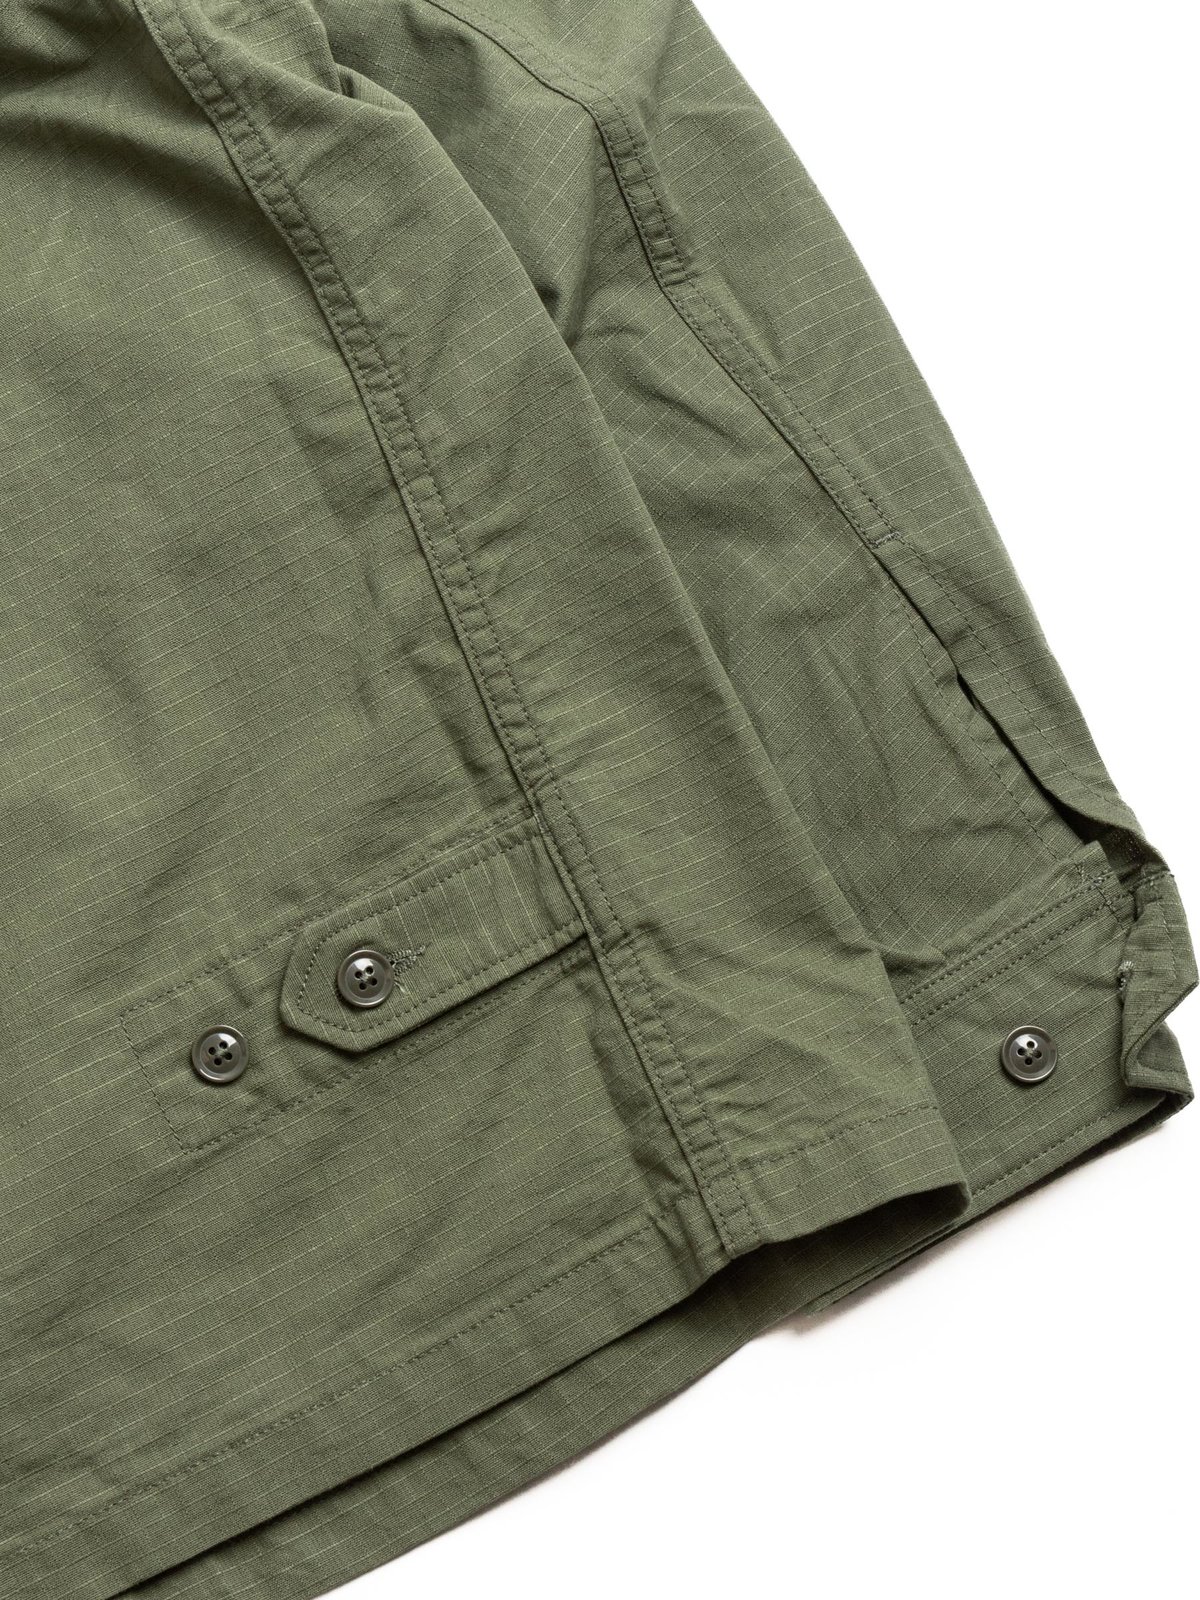 CLAIGTON JACKET OLIVE COTTON RIPSTOP by Engineered Garments – The ...